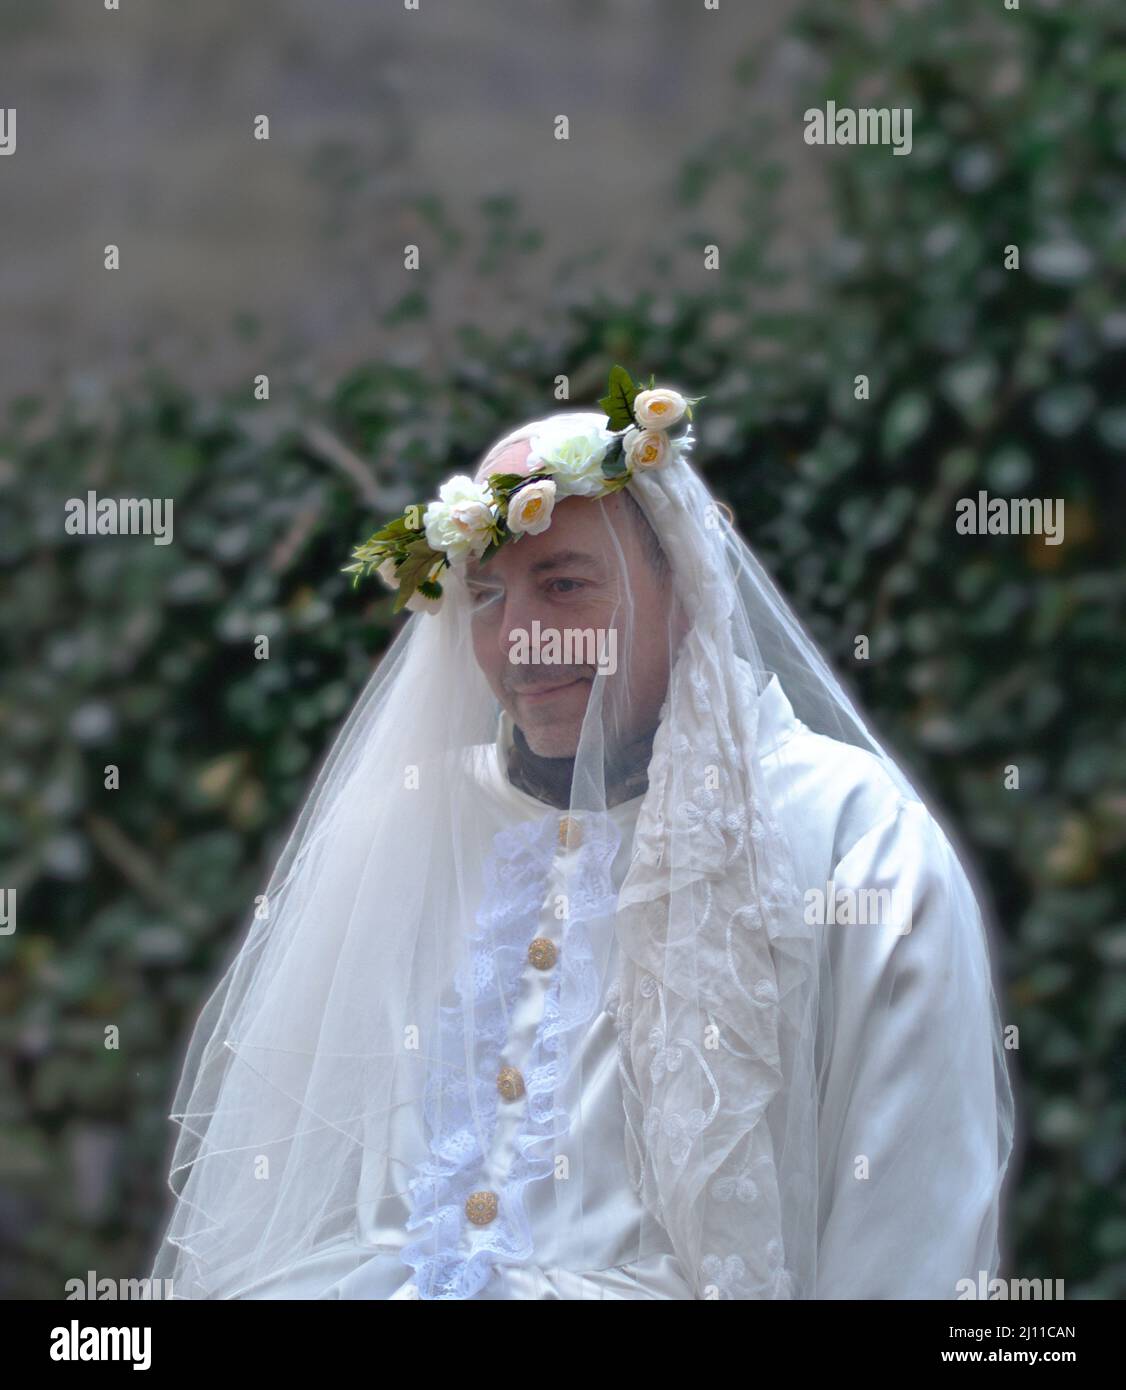 Enciso, Spain – March 5, 2022: Shy man dressed up in a white wedding dress and flower crown on his head looking away. Traditional carnival of Enciso. Stock Photo